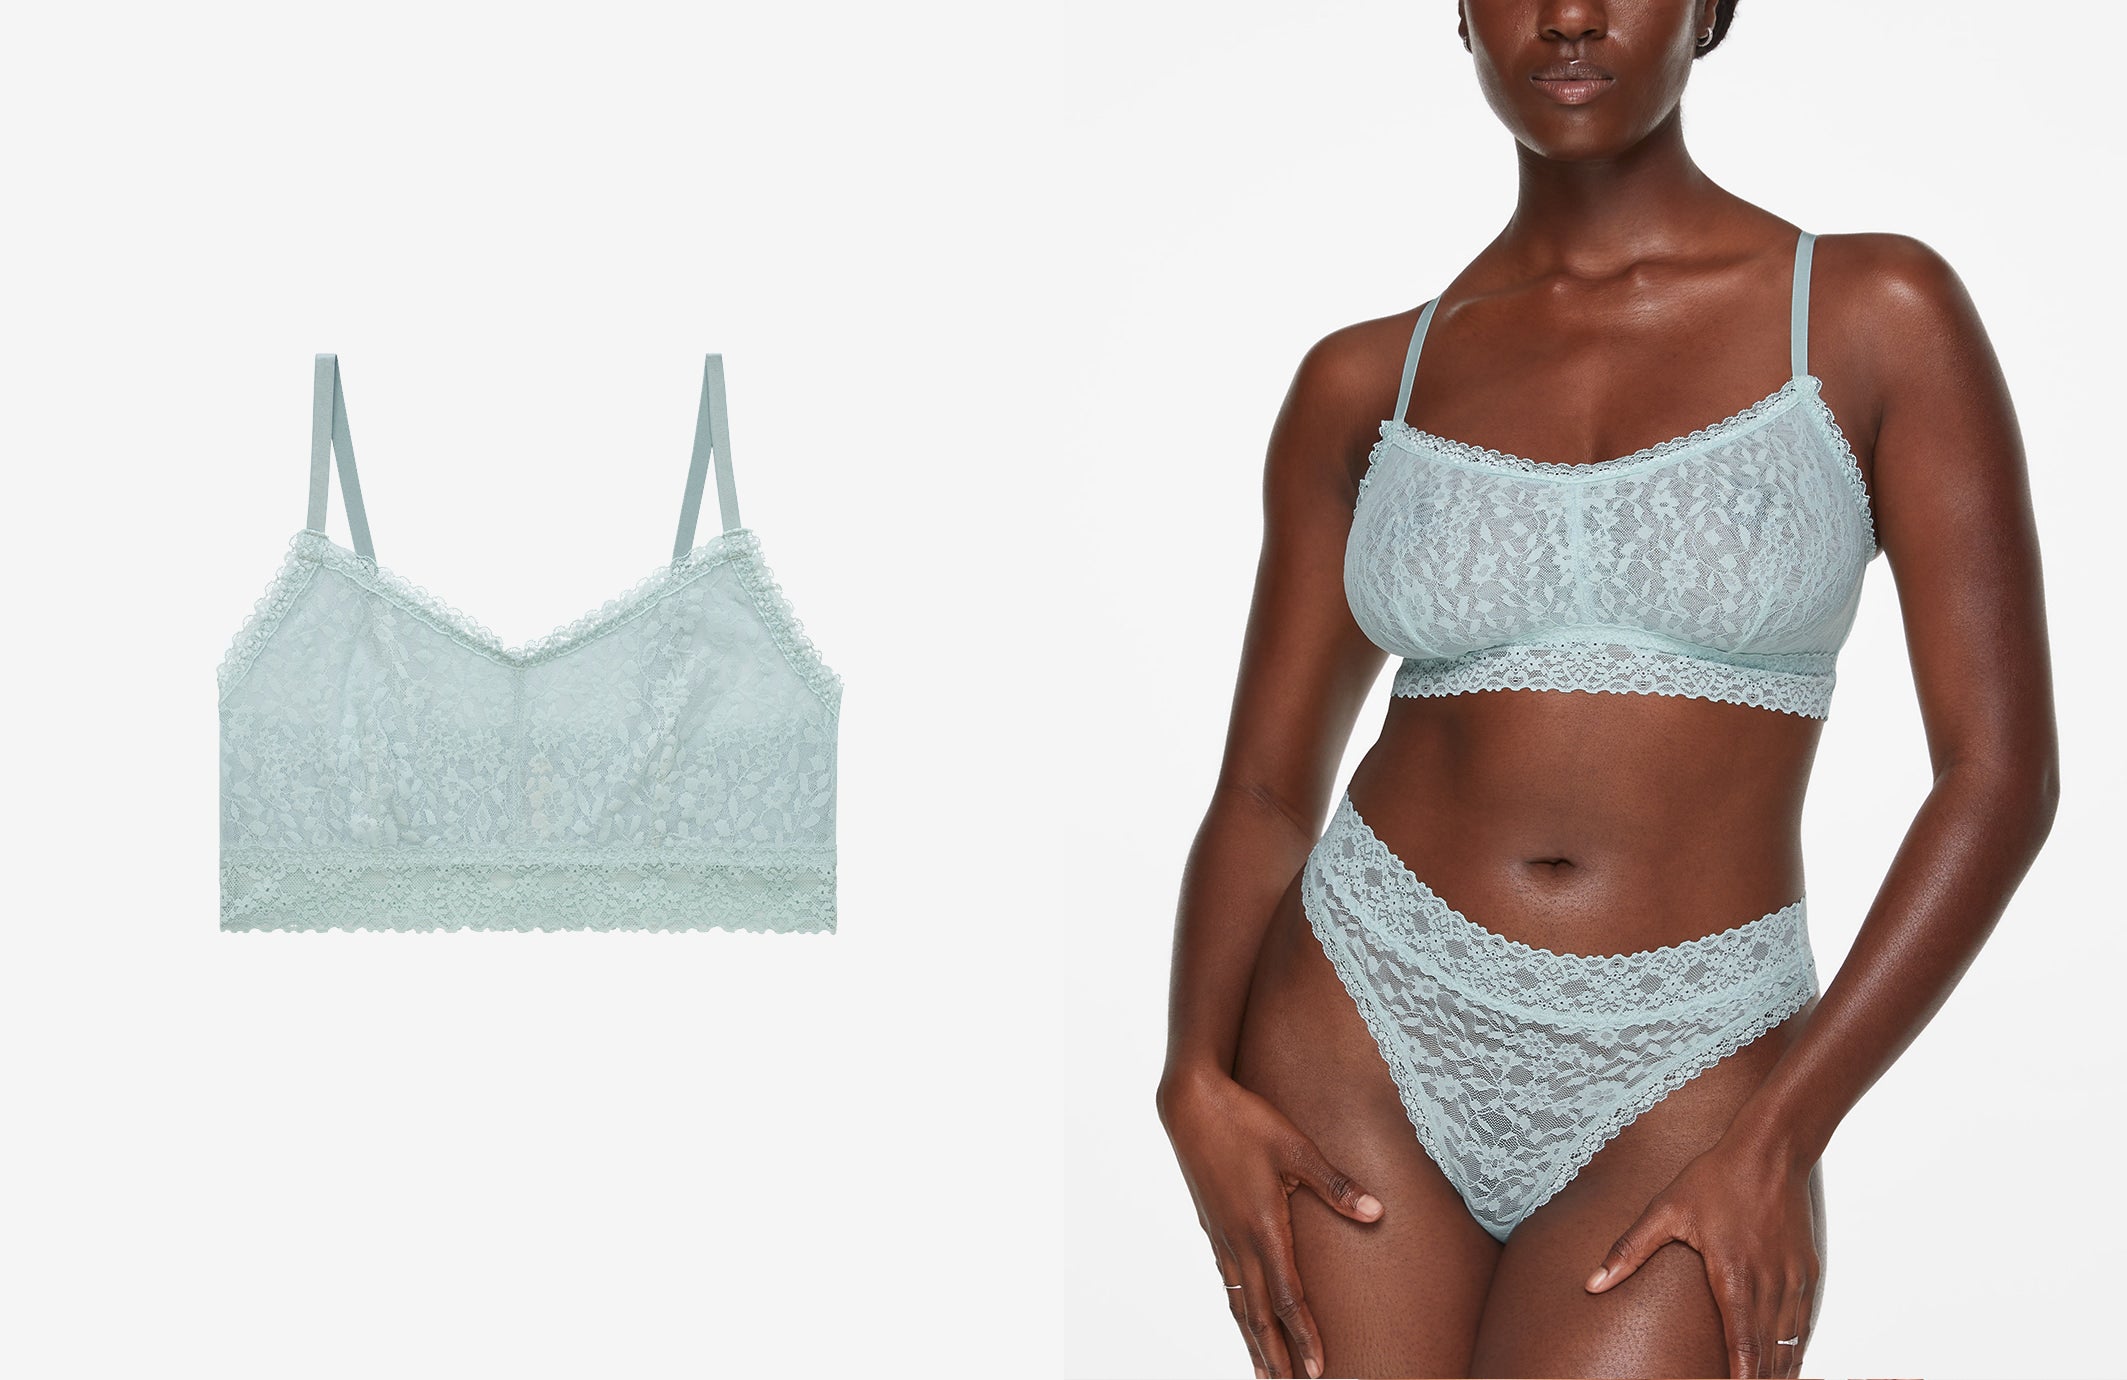 Bra vs bralette: Which style is best for you?